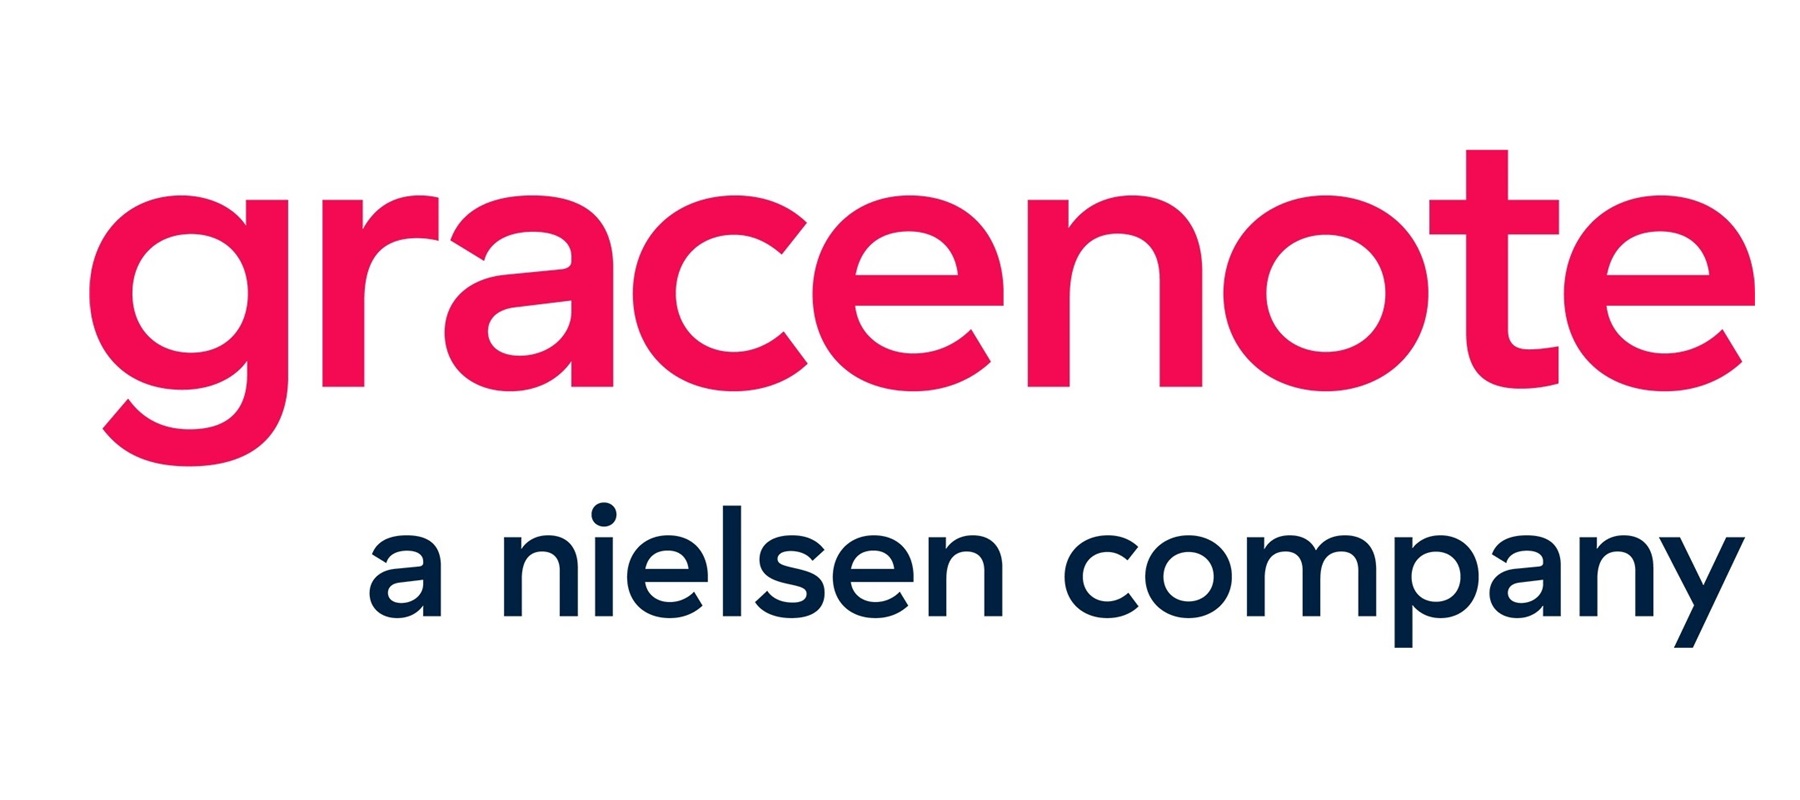 Nielsen’s Gracenote partners with media advocacy groups to make diverse content creators and talent more accessible